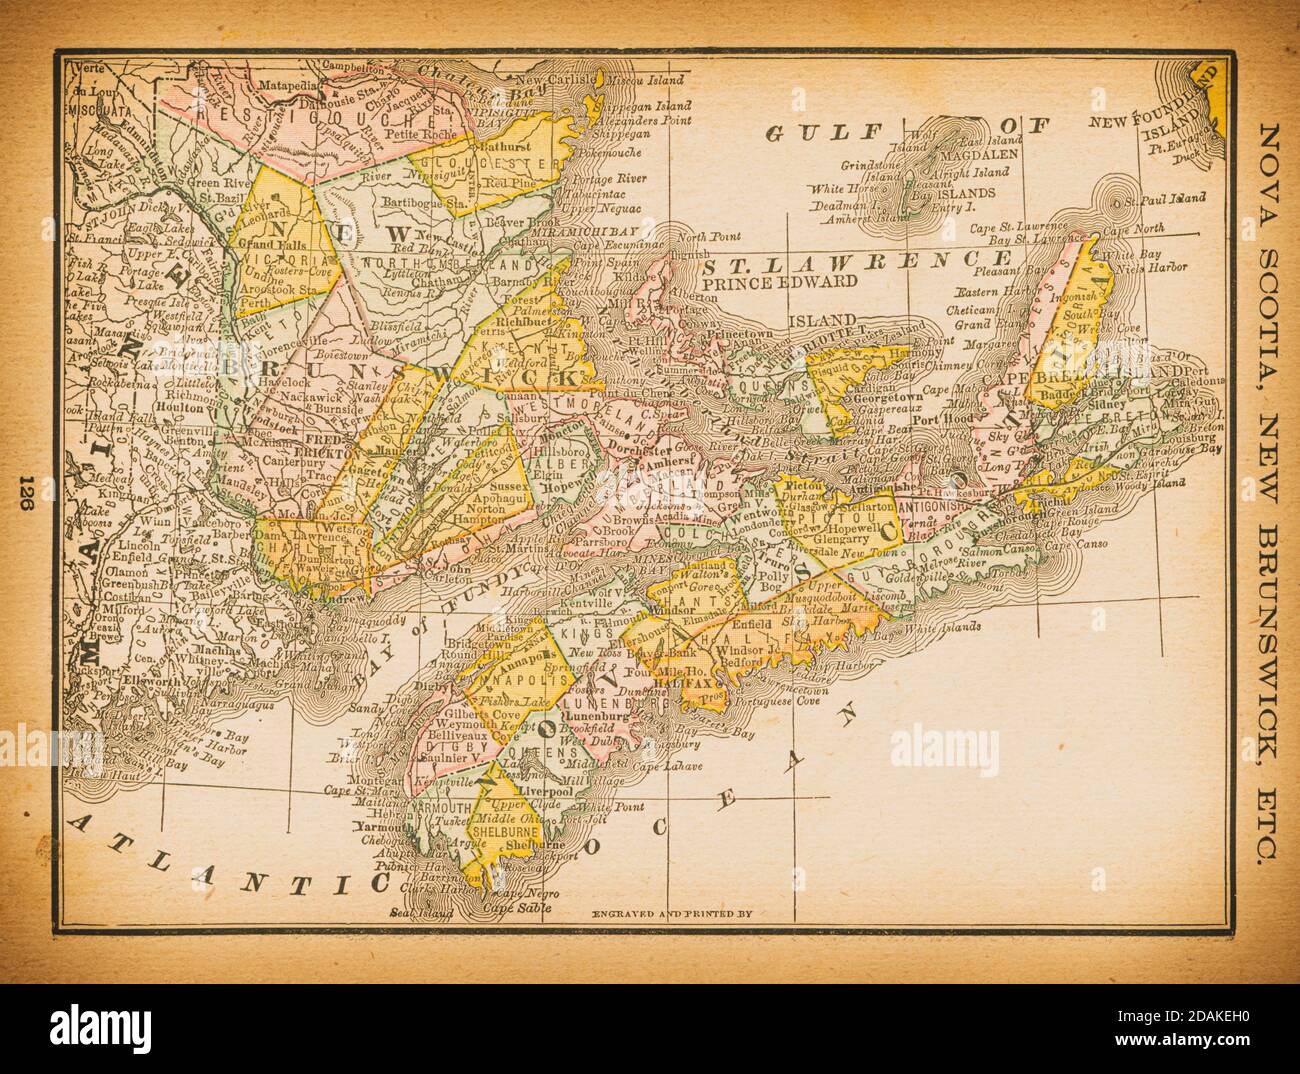 19th century map of Nova Scotia, New Brunswick. Published in New Dollar Atlas of the United States and Dominion of Canada. (Rand McNally & Co's, Chica Stock Photo